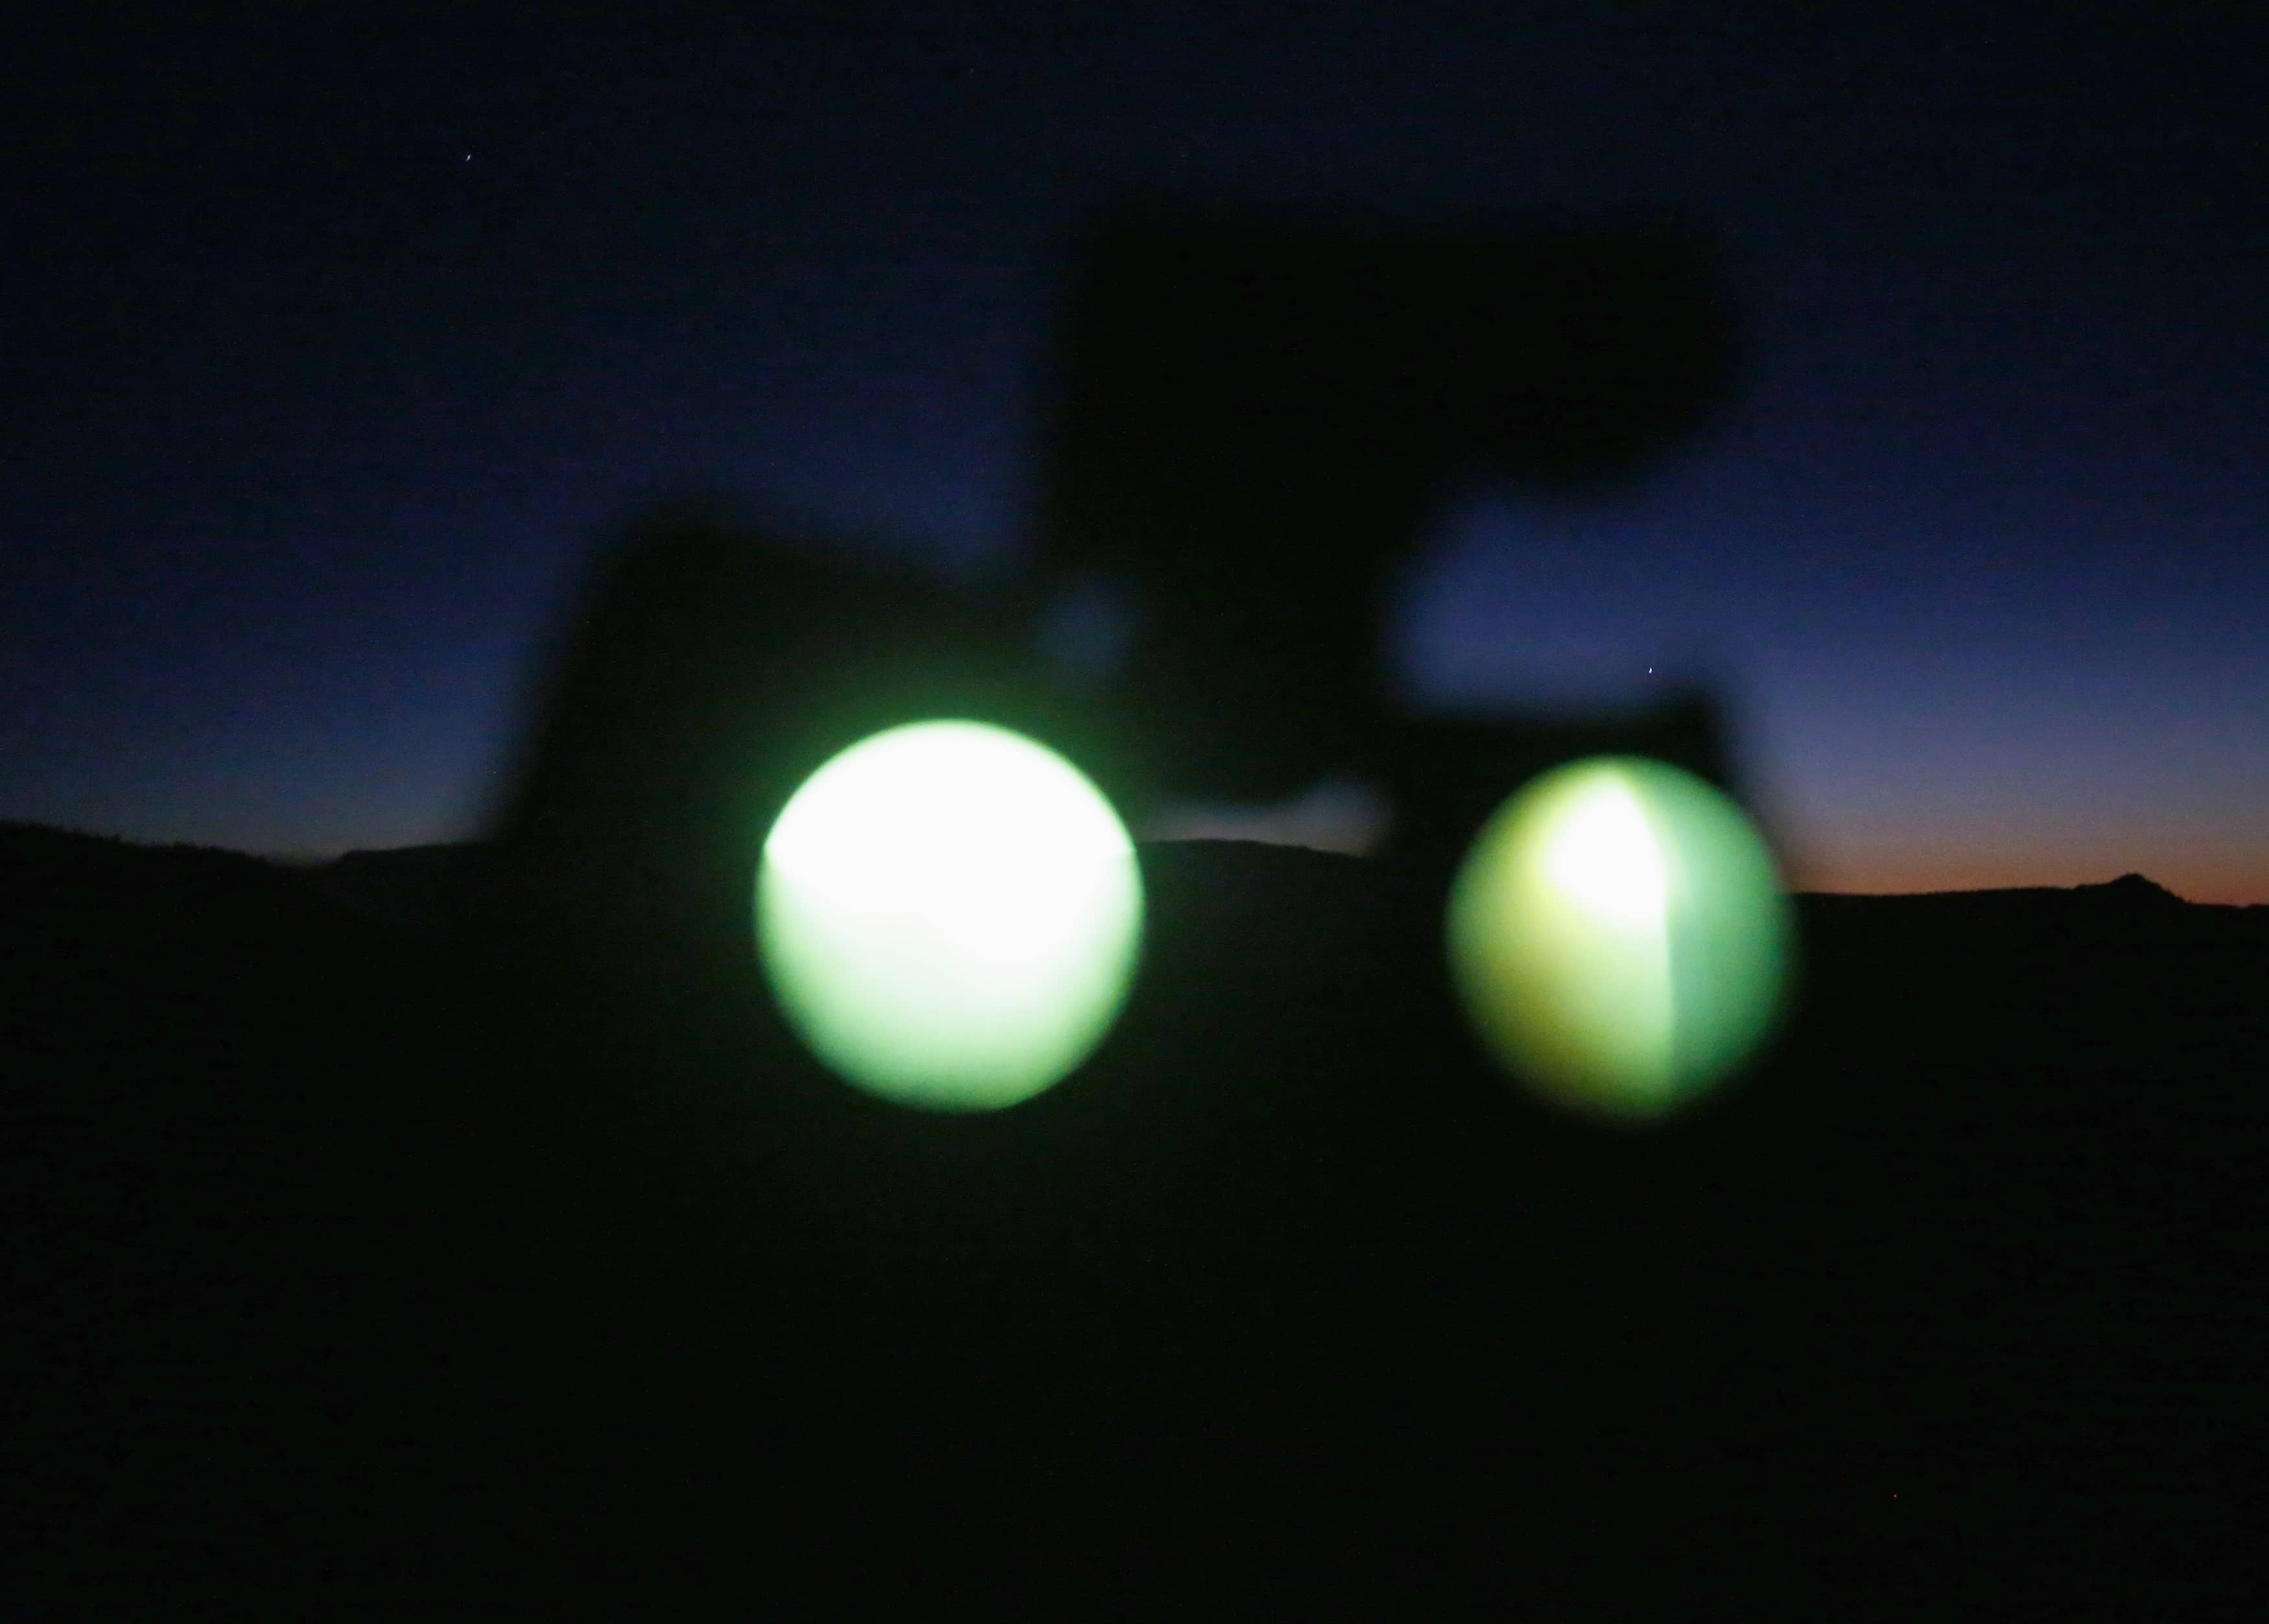 a-pair-of-night-vision-goggles-are-seen-during-a-ufo-tour-in-the-desert-outside-sedona